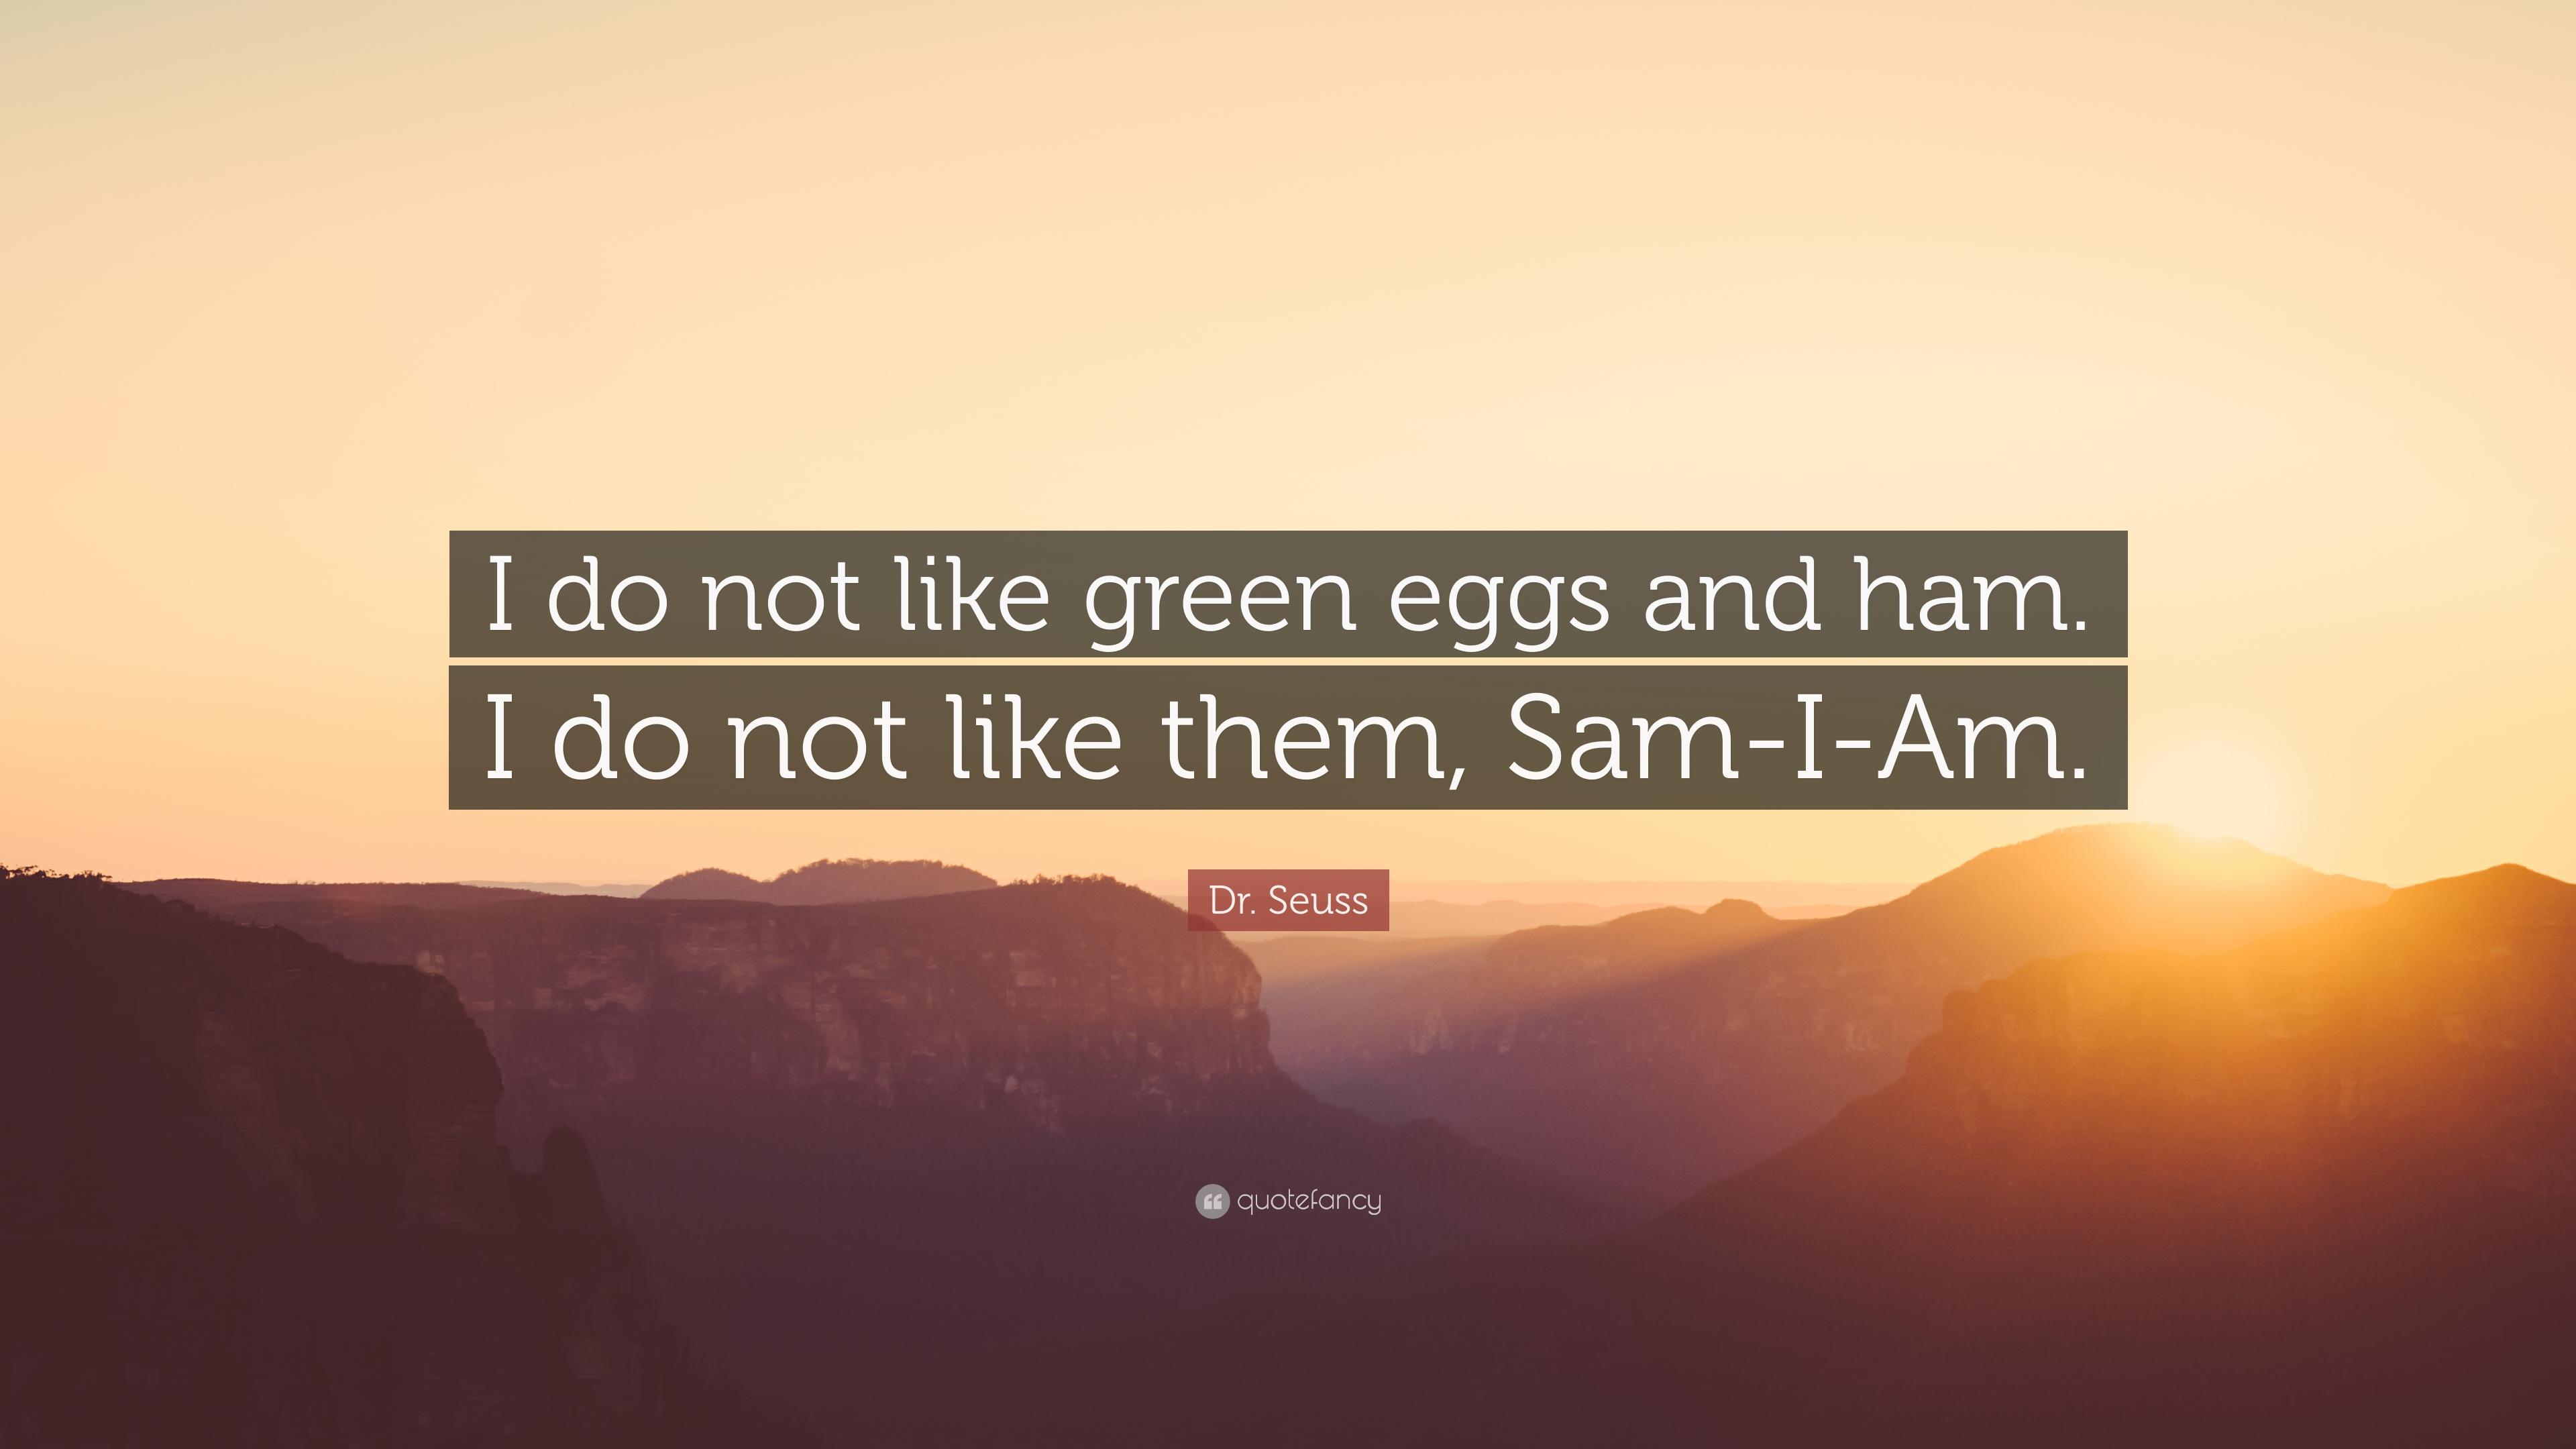 Dr. Seuss Quote: “I do not like green eggs and ham. I do not